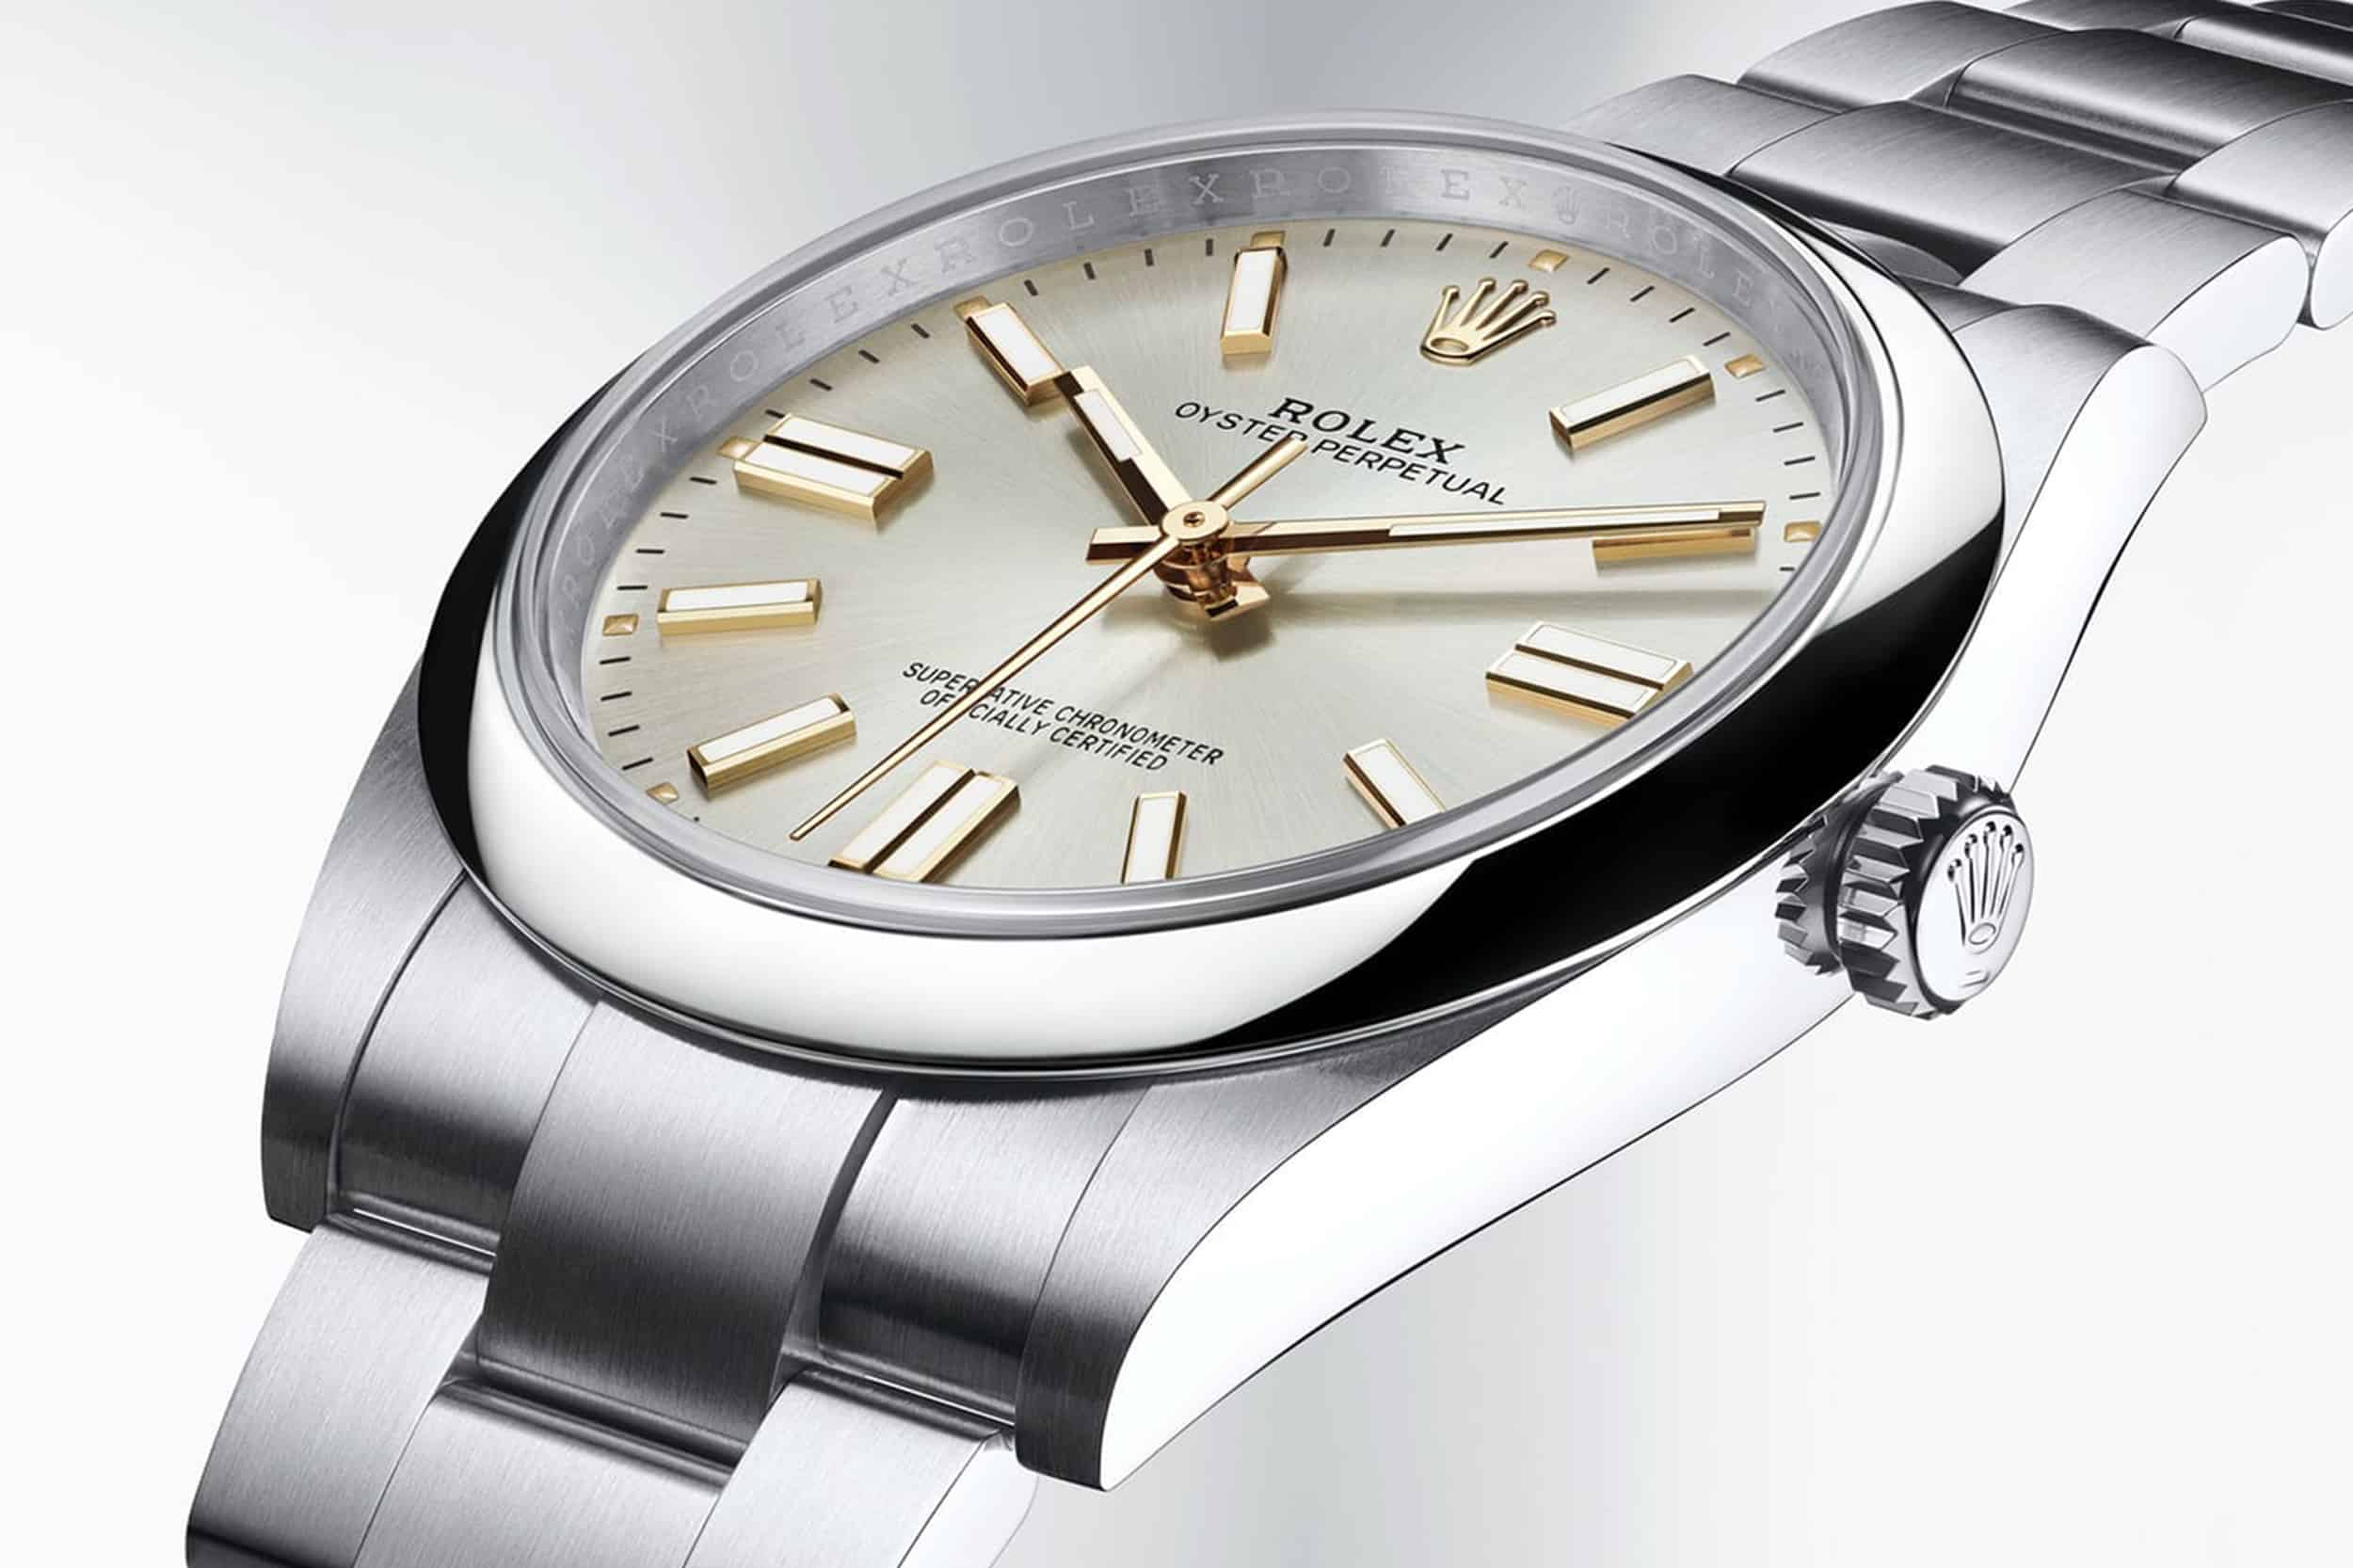 The Rolex Oyster Perpetual, Now in New Bright Colors and a Larger Case